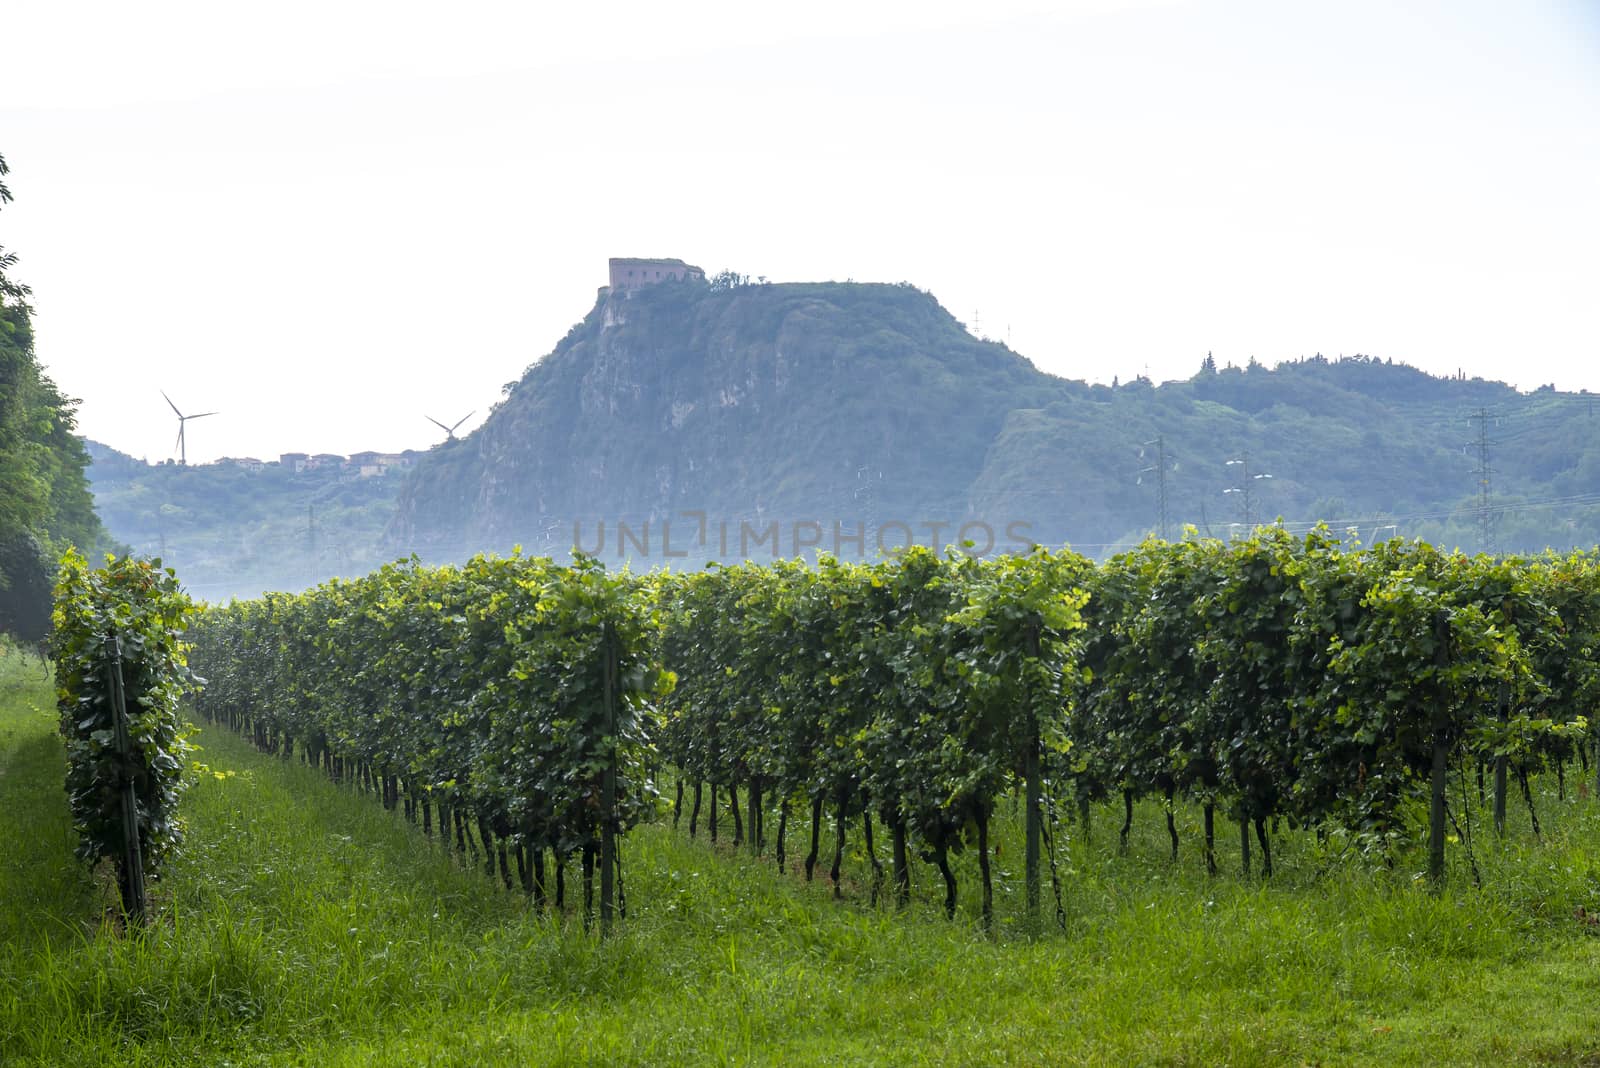 Many rows of green vines in several rows with mountains in the background